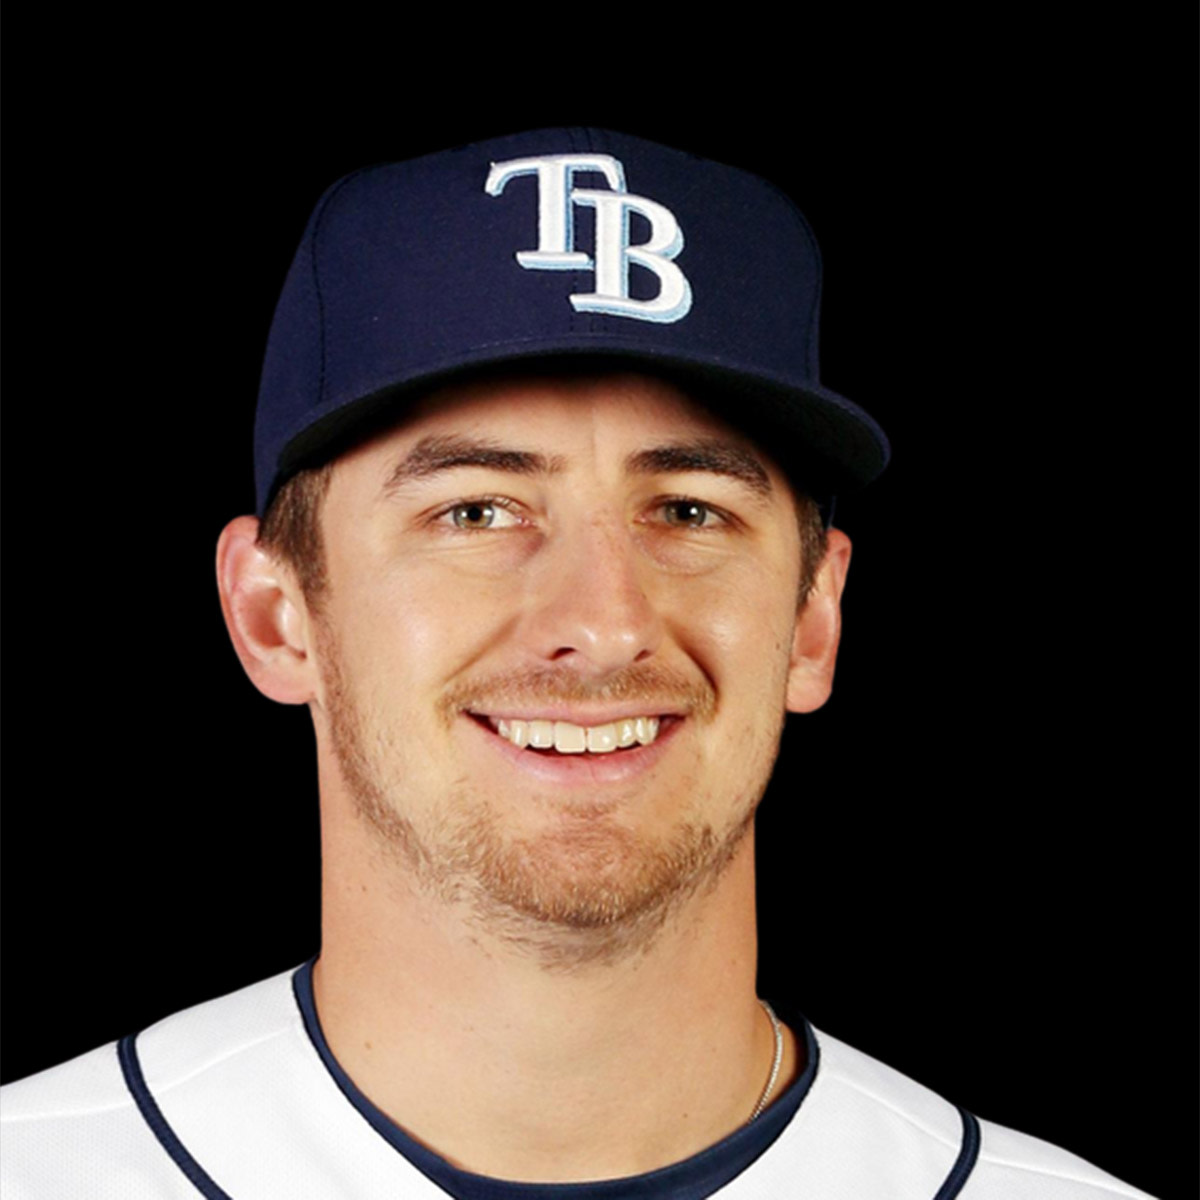 Tampa Bay Rays catcher Ford Proctor